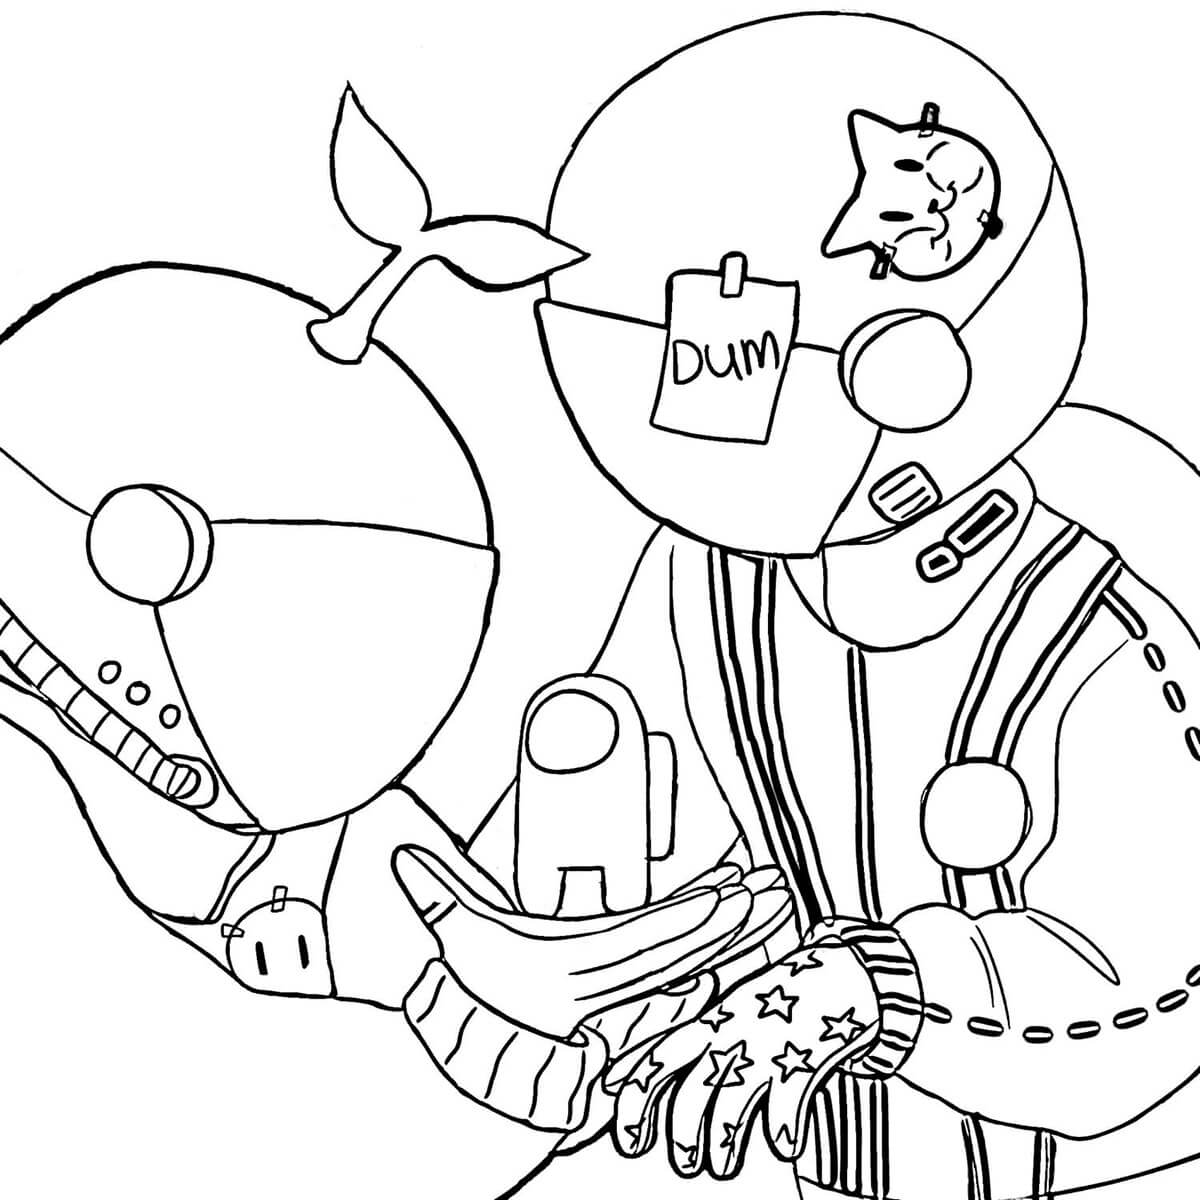 Among Us Imposter Coloring Page - Free Printable Coloring Pages for Kids